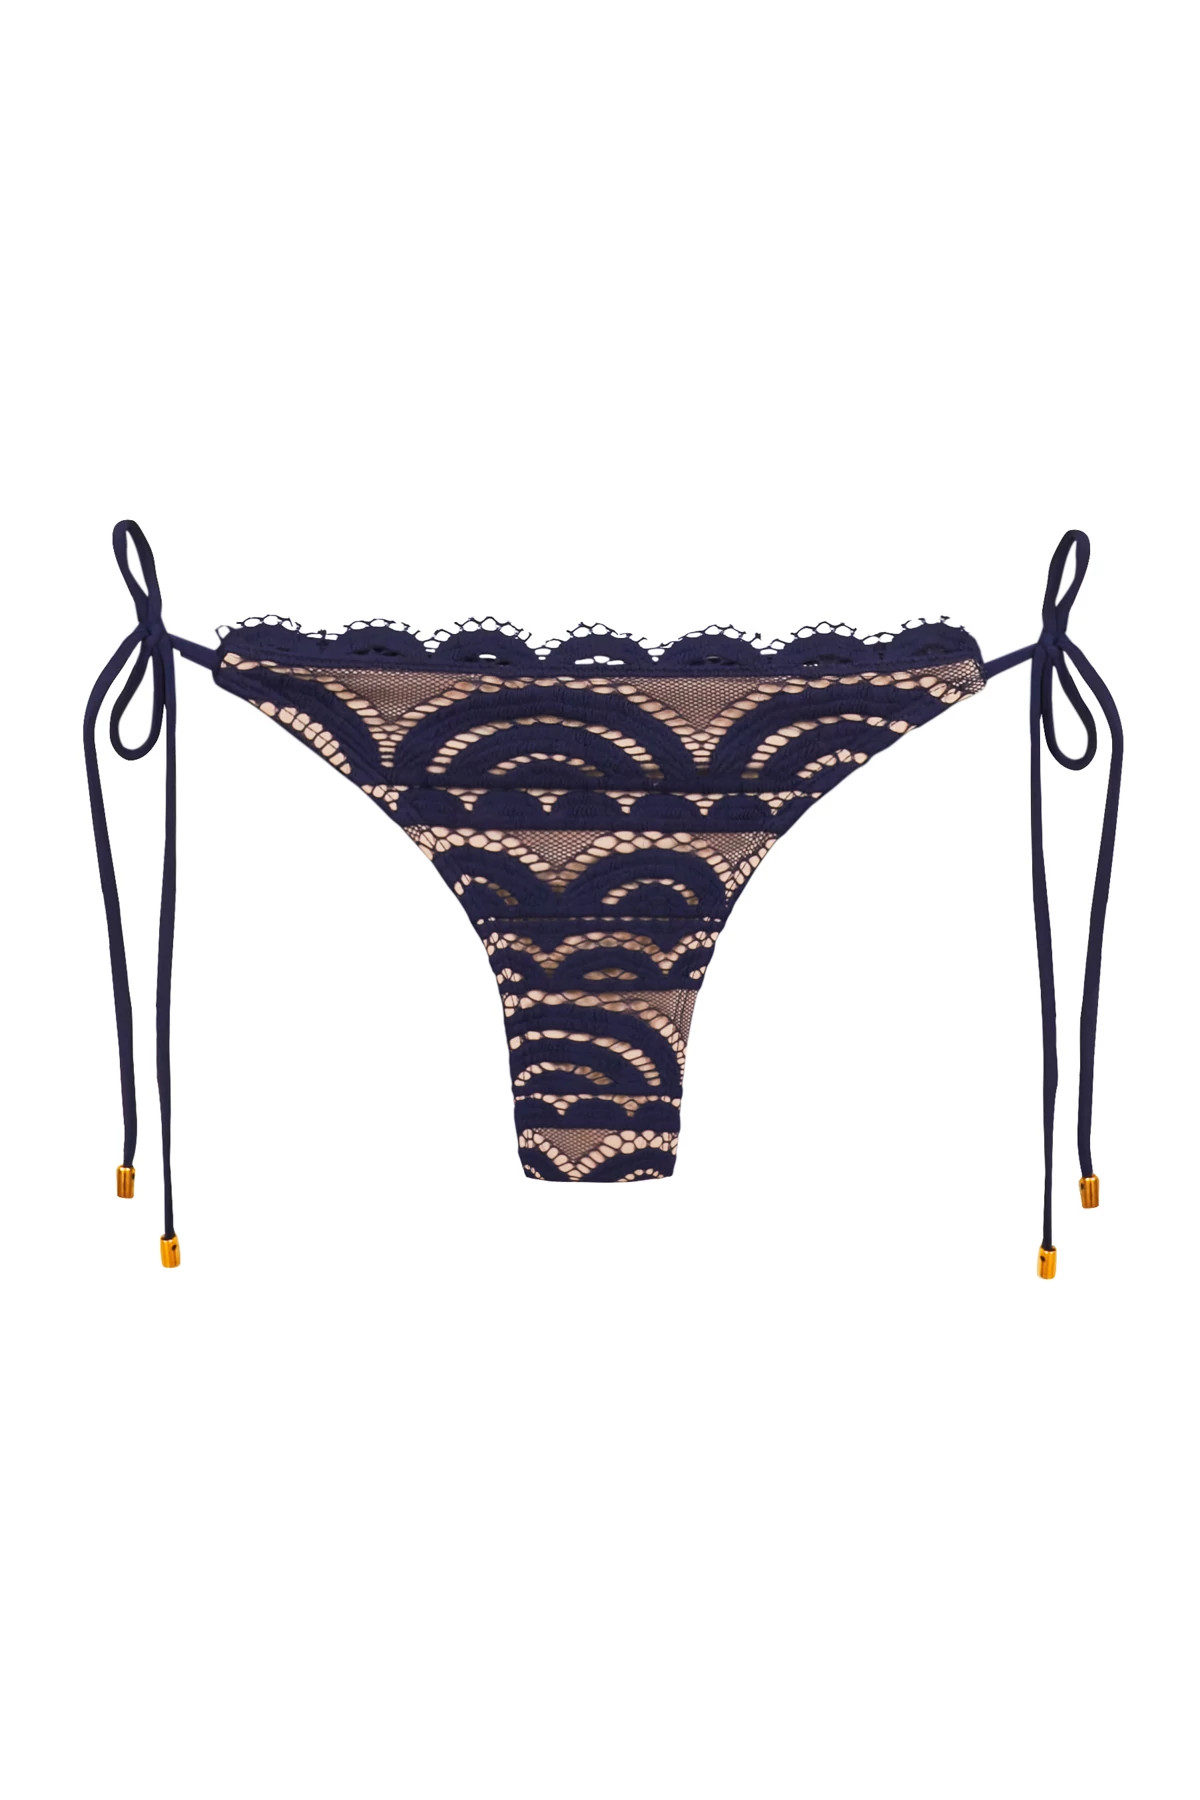 NEPTUNE Lace Tie Side Hipster Bikini Bottom image number 4